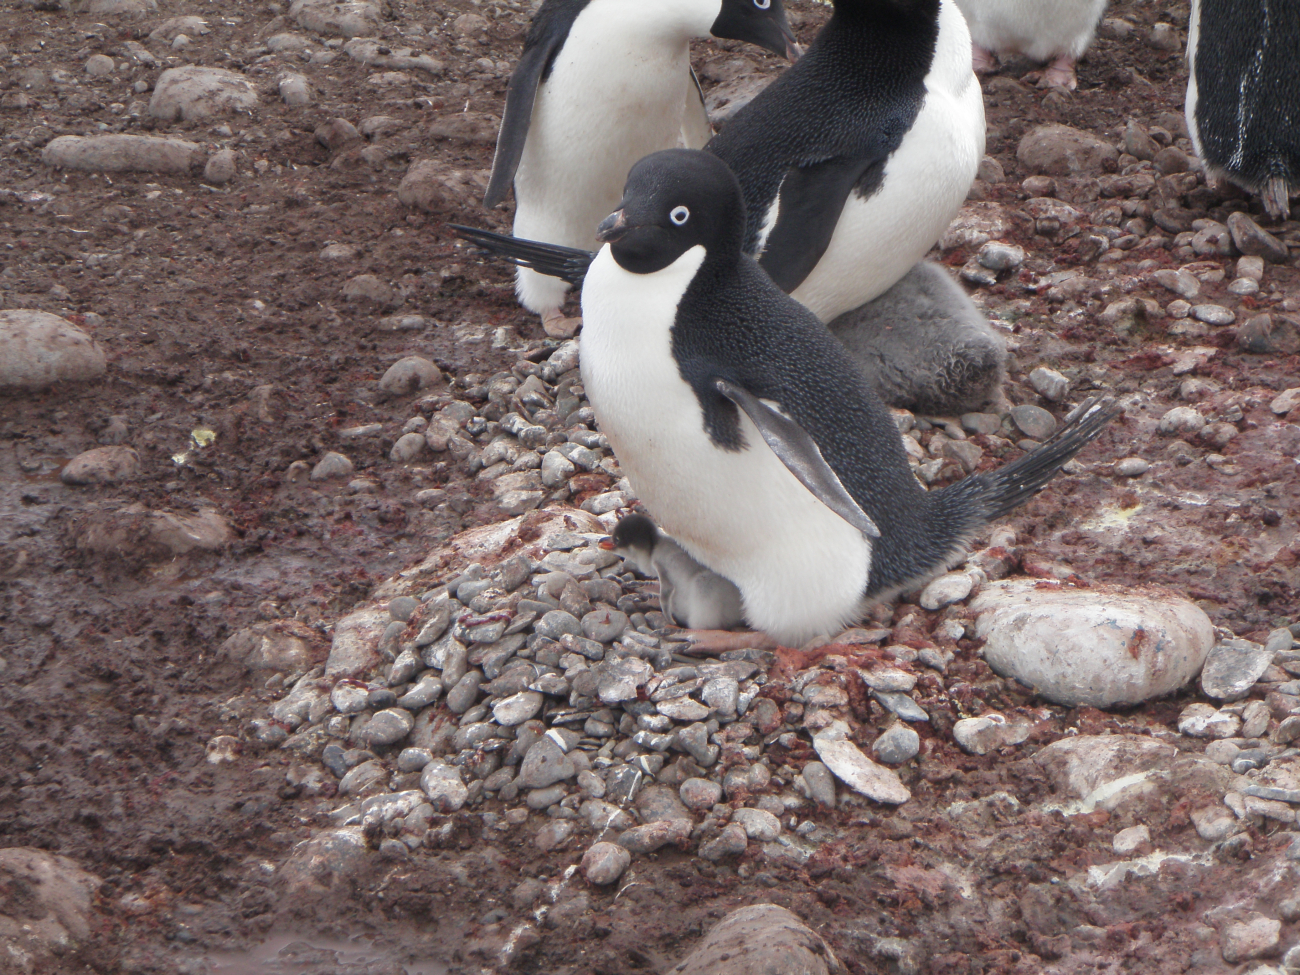 An Adelie penguin warms its chick